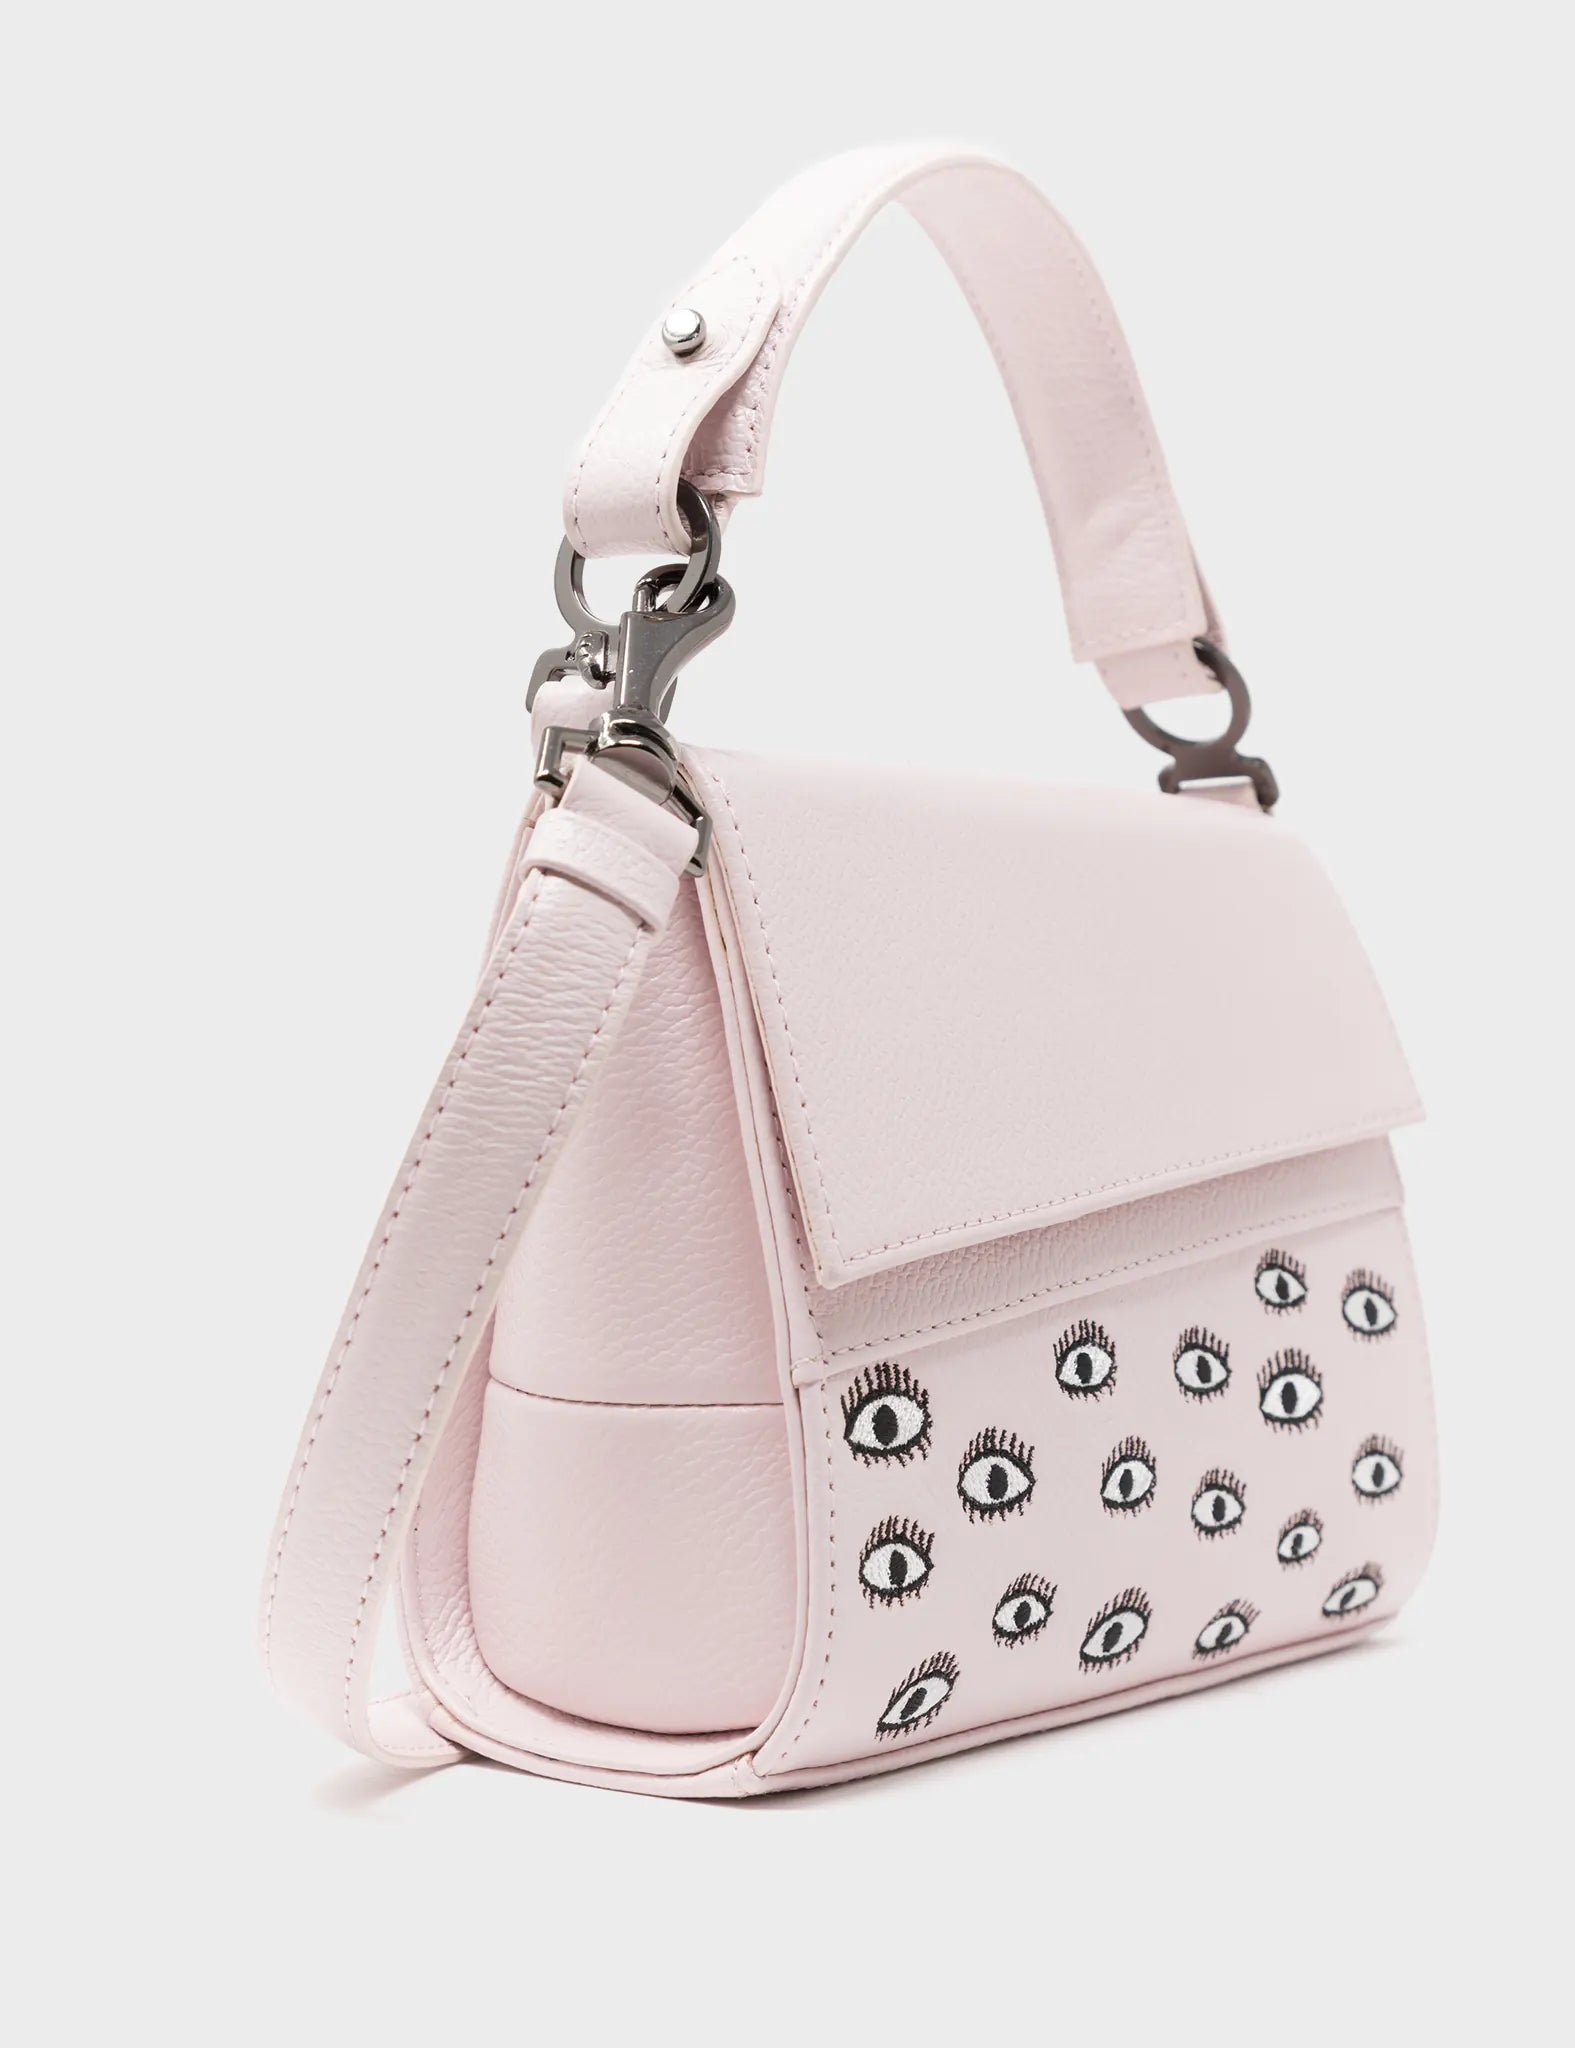 Anastasio Micro Crossbody Handbag Powder Pink Leather - Eyes Embroidery  - front side view close up 